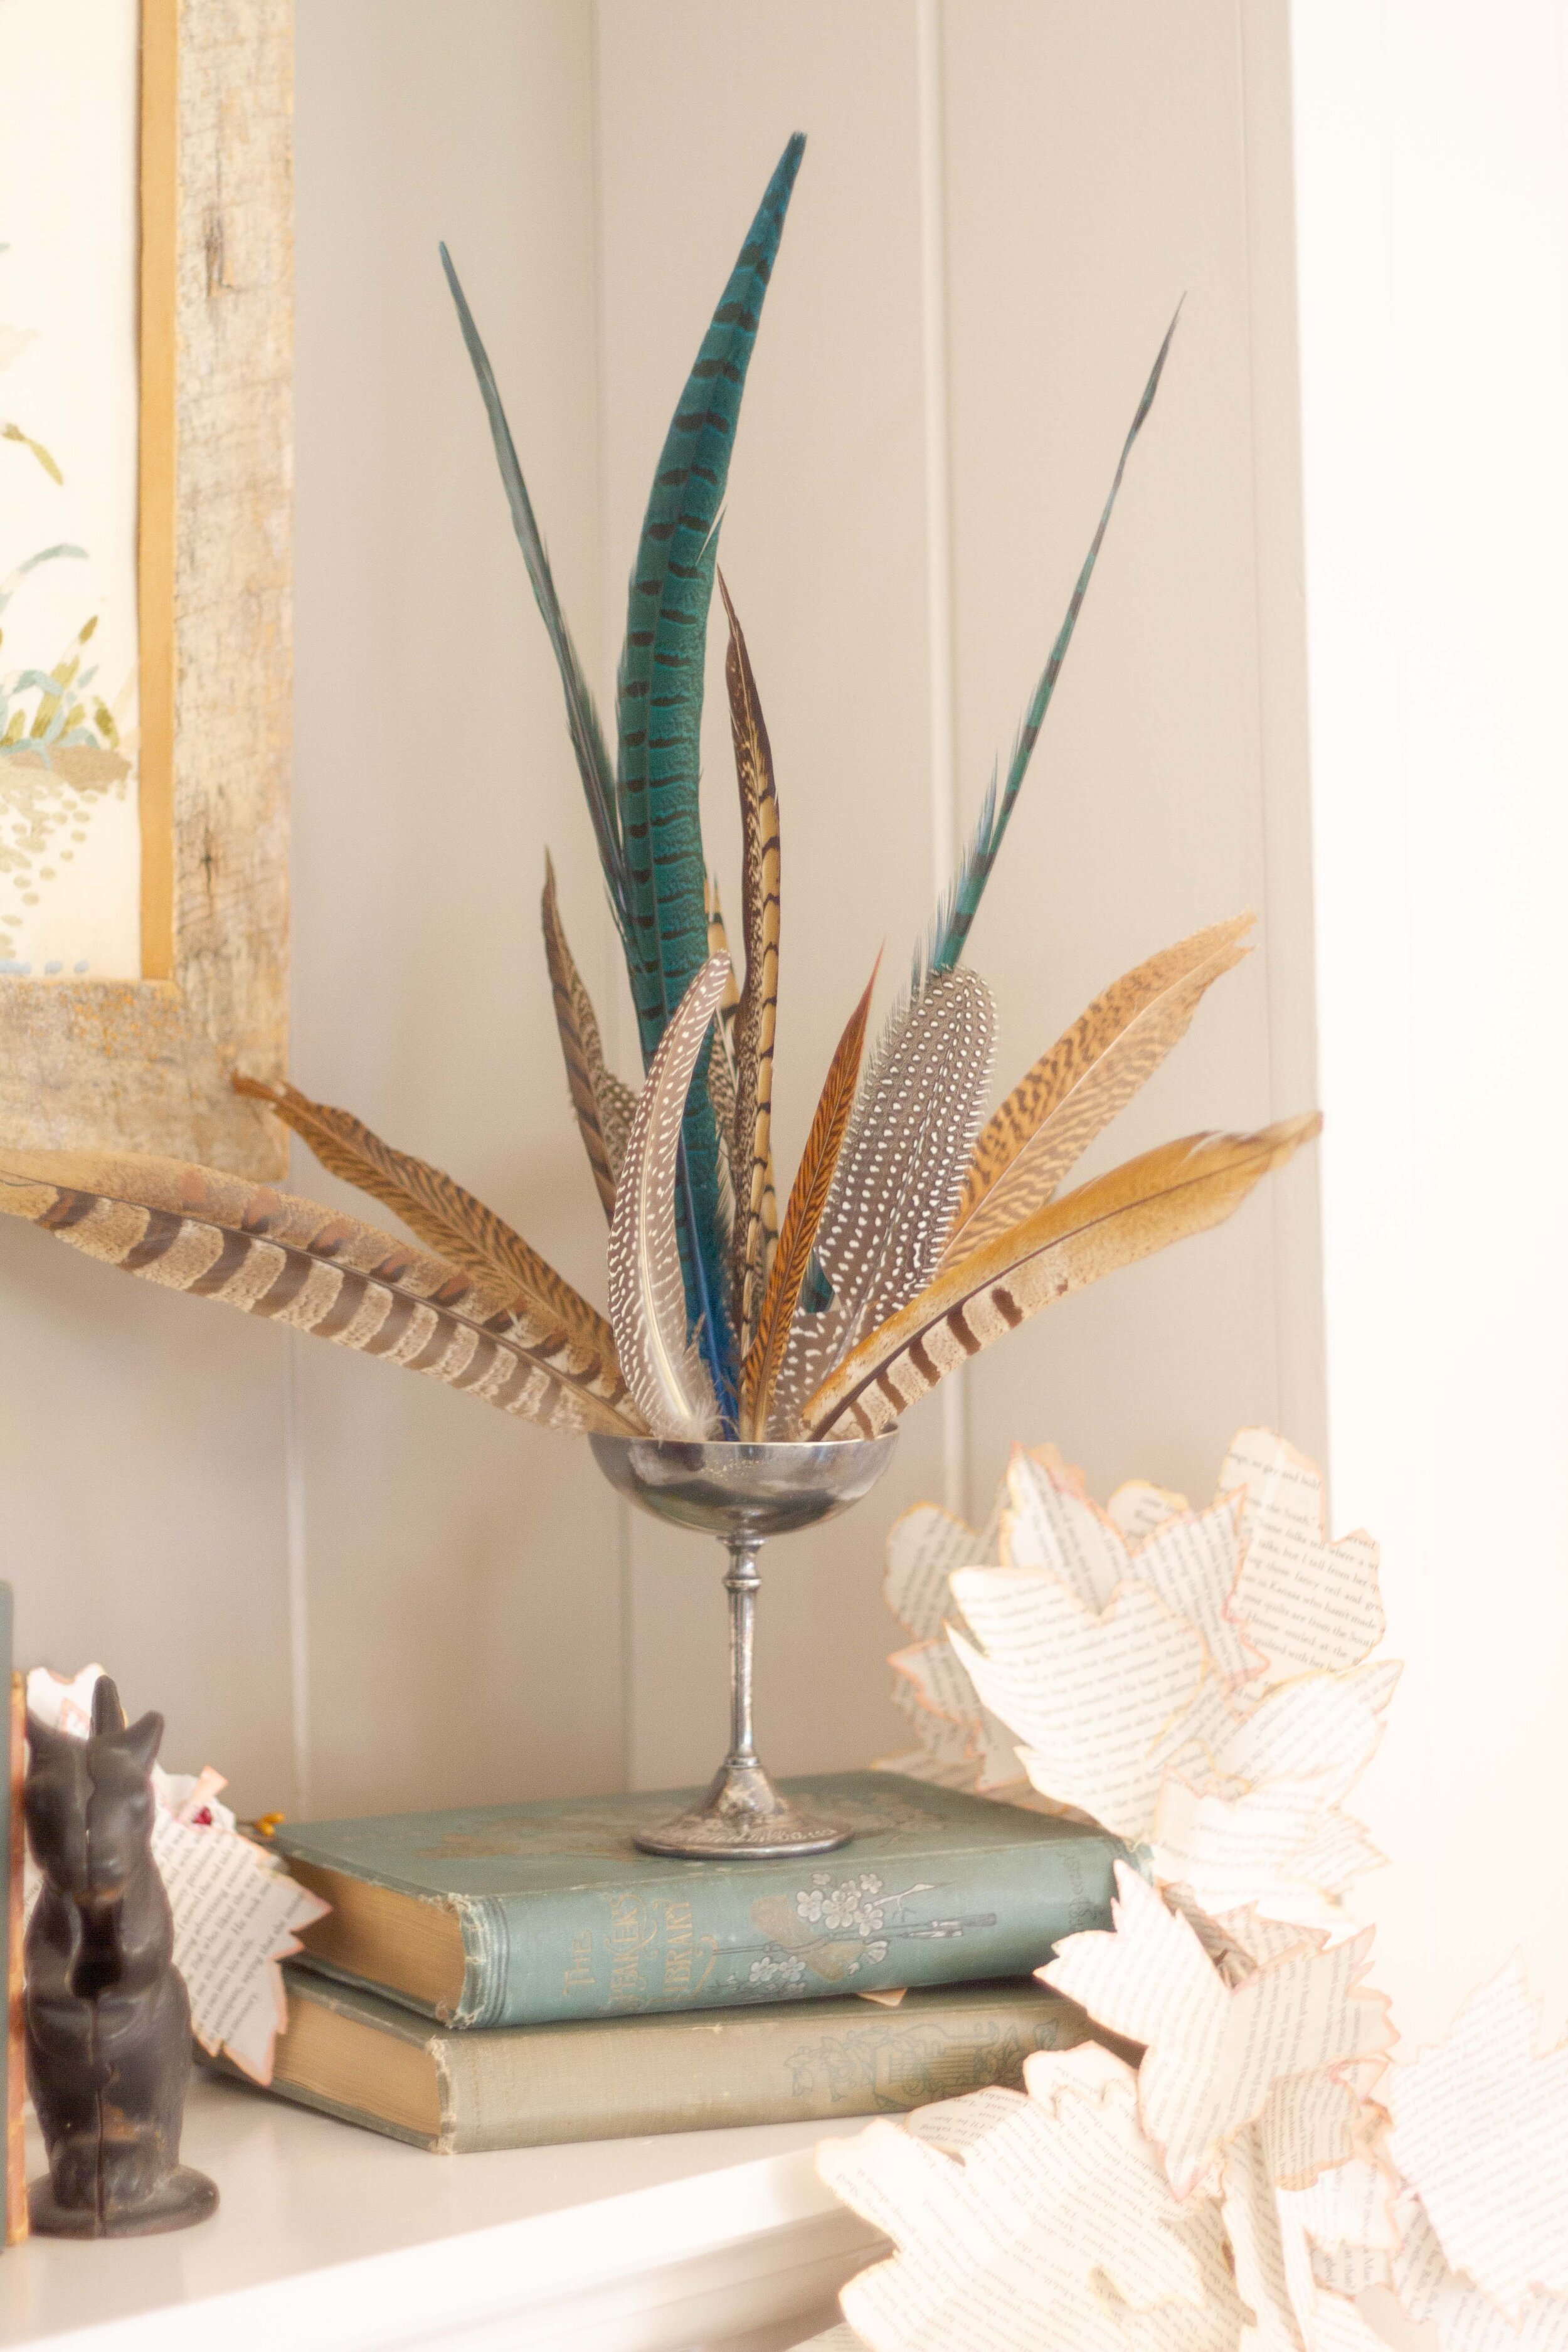 Fall-Inspired Centerpiece with Pheasant Feathers